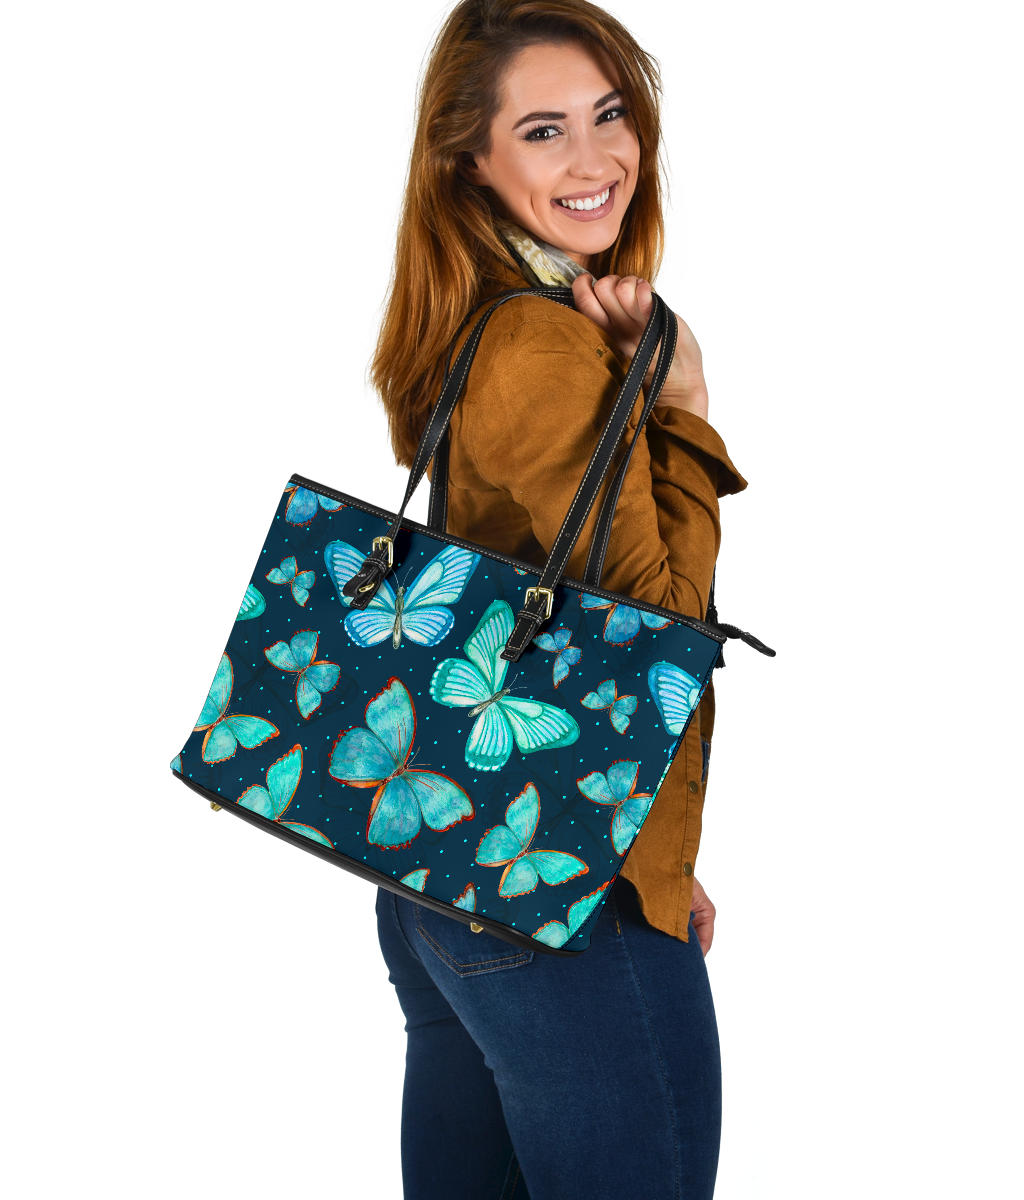 Spiritual Butterfly Premium Faux Leather Bag